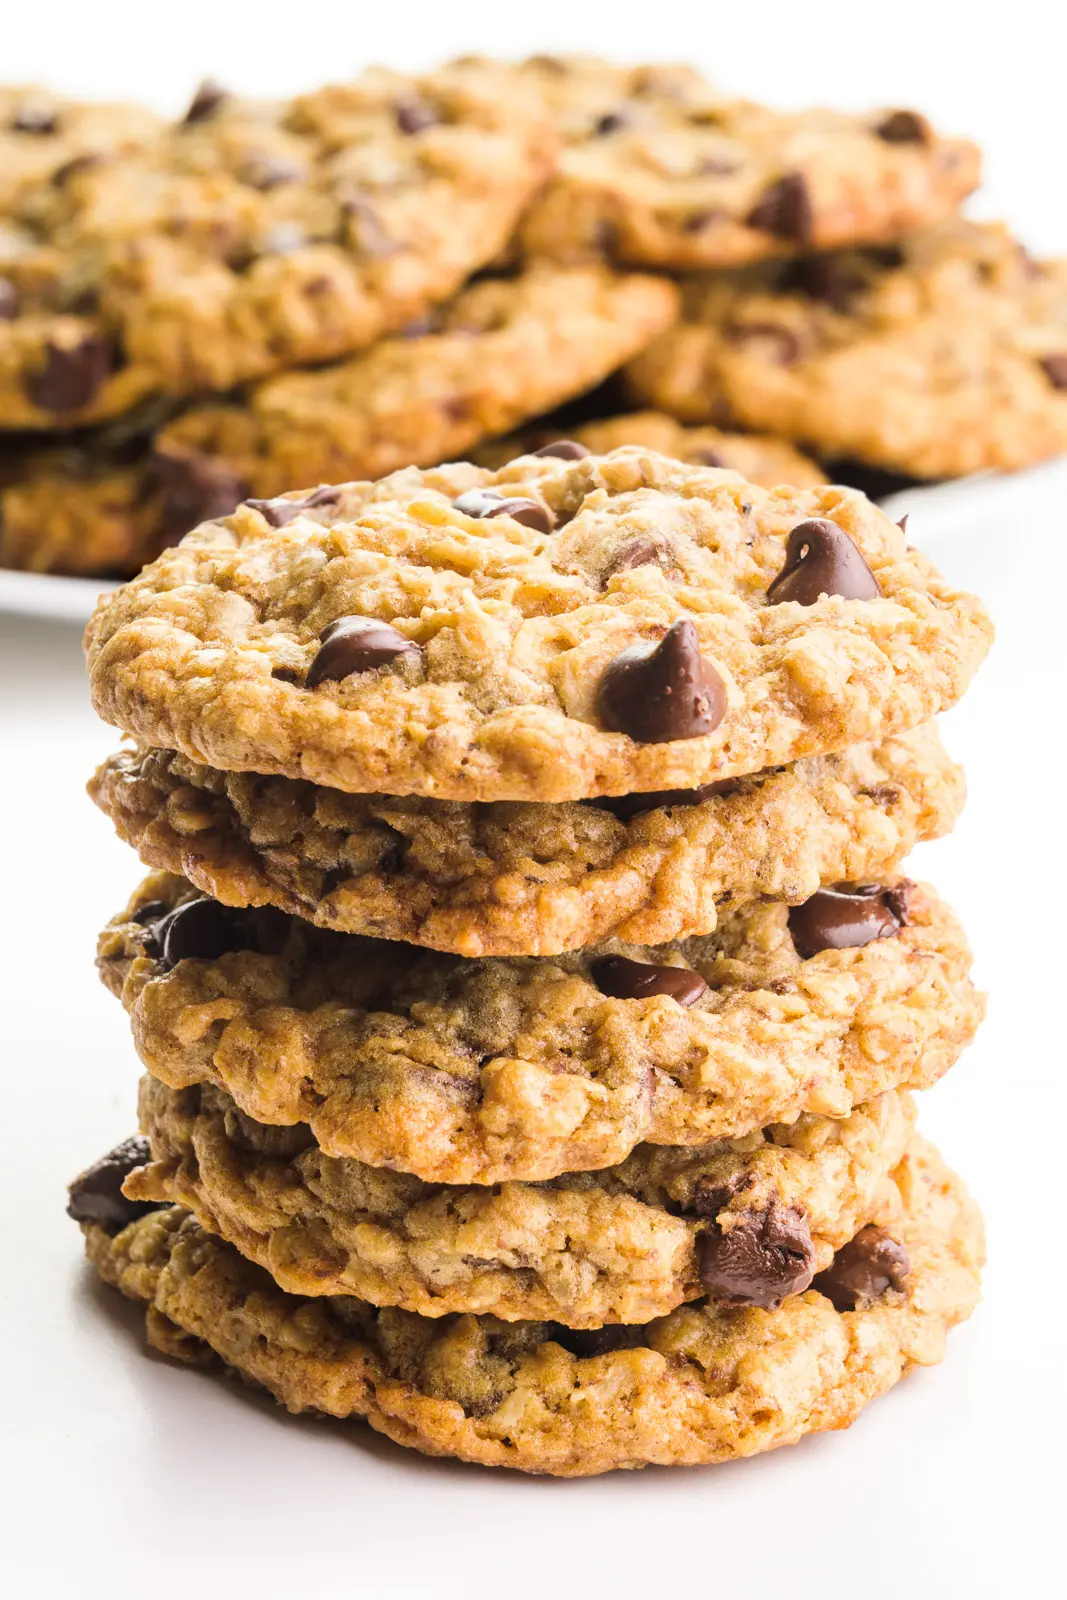 A stack of vegan oatmeal chocolate chip cookies sits in front of a plate with more cookies.